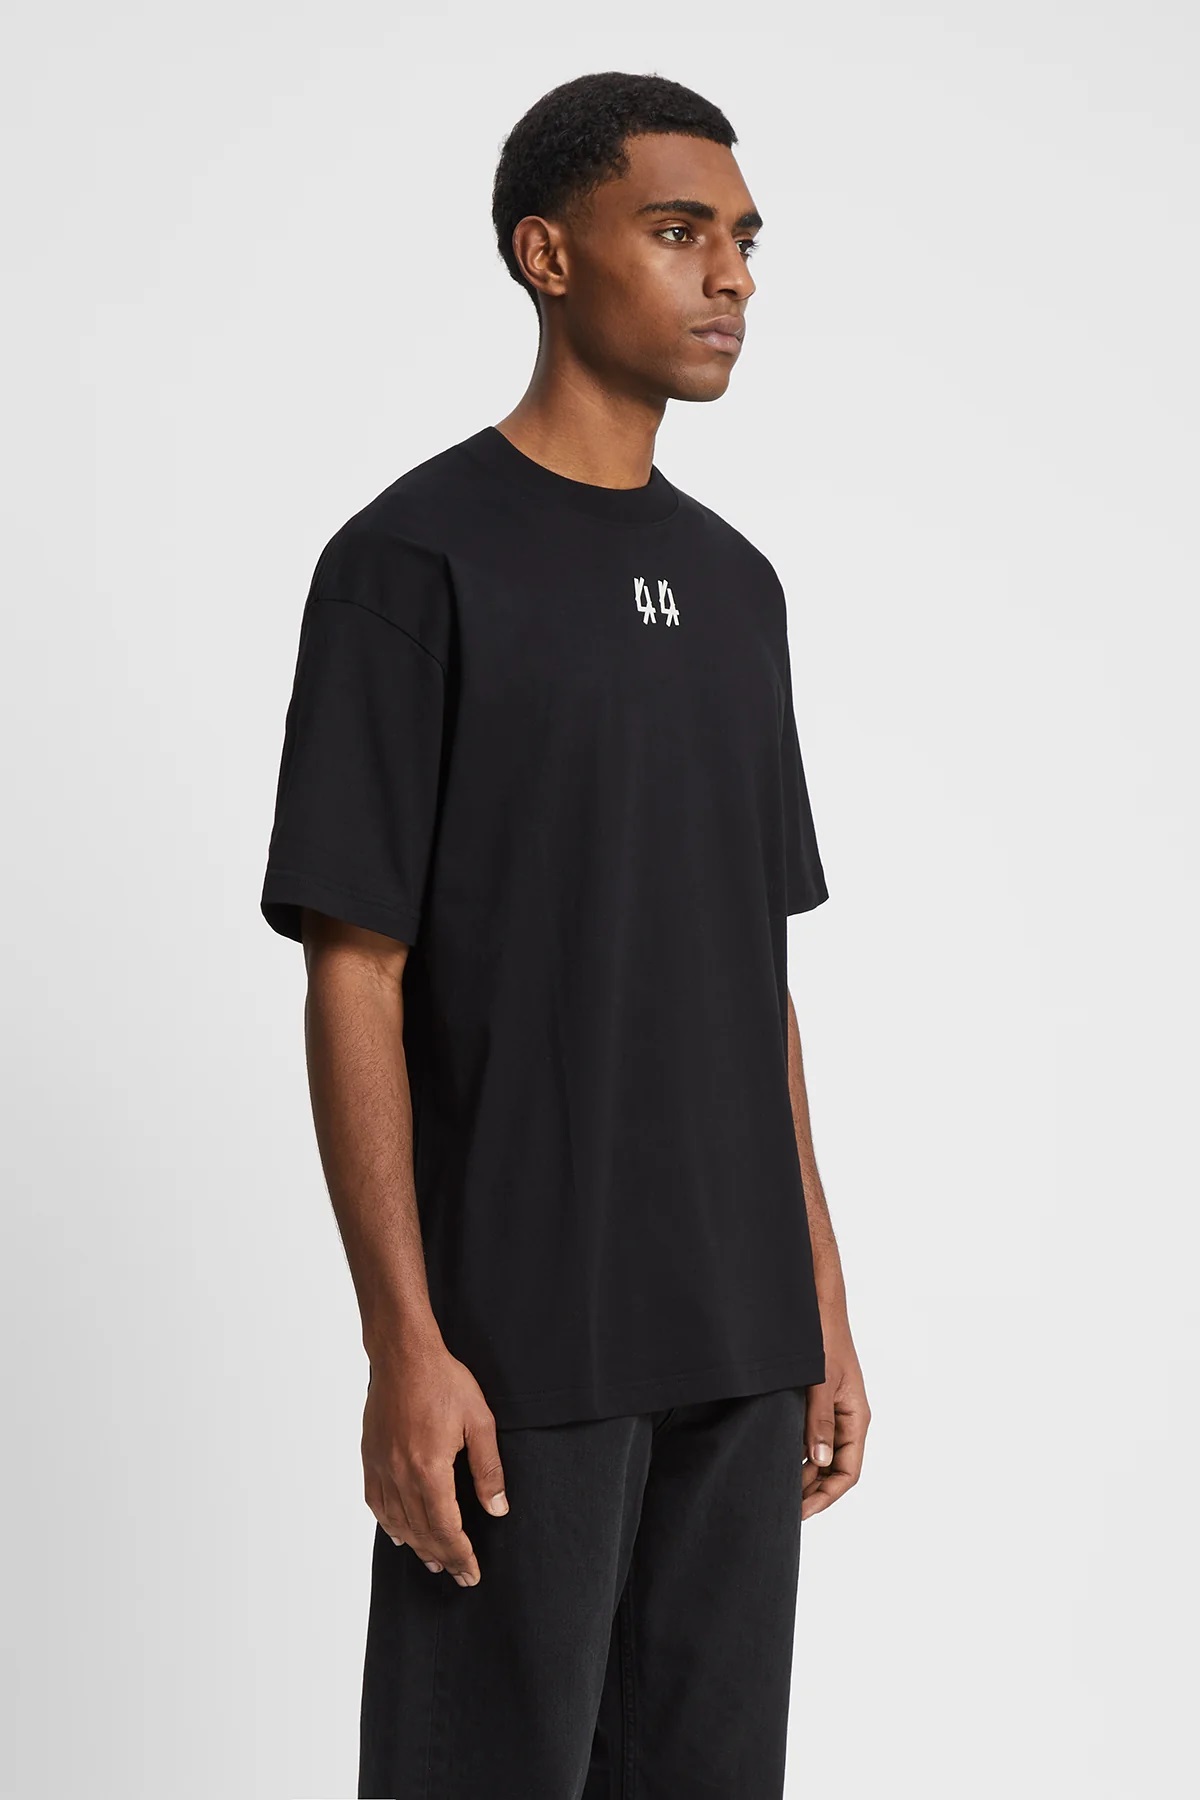 44 LABEL GROUP Continuum T-Shirt in Black S